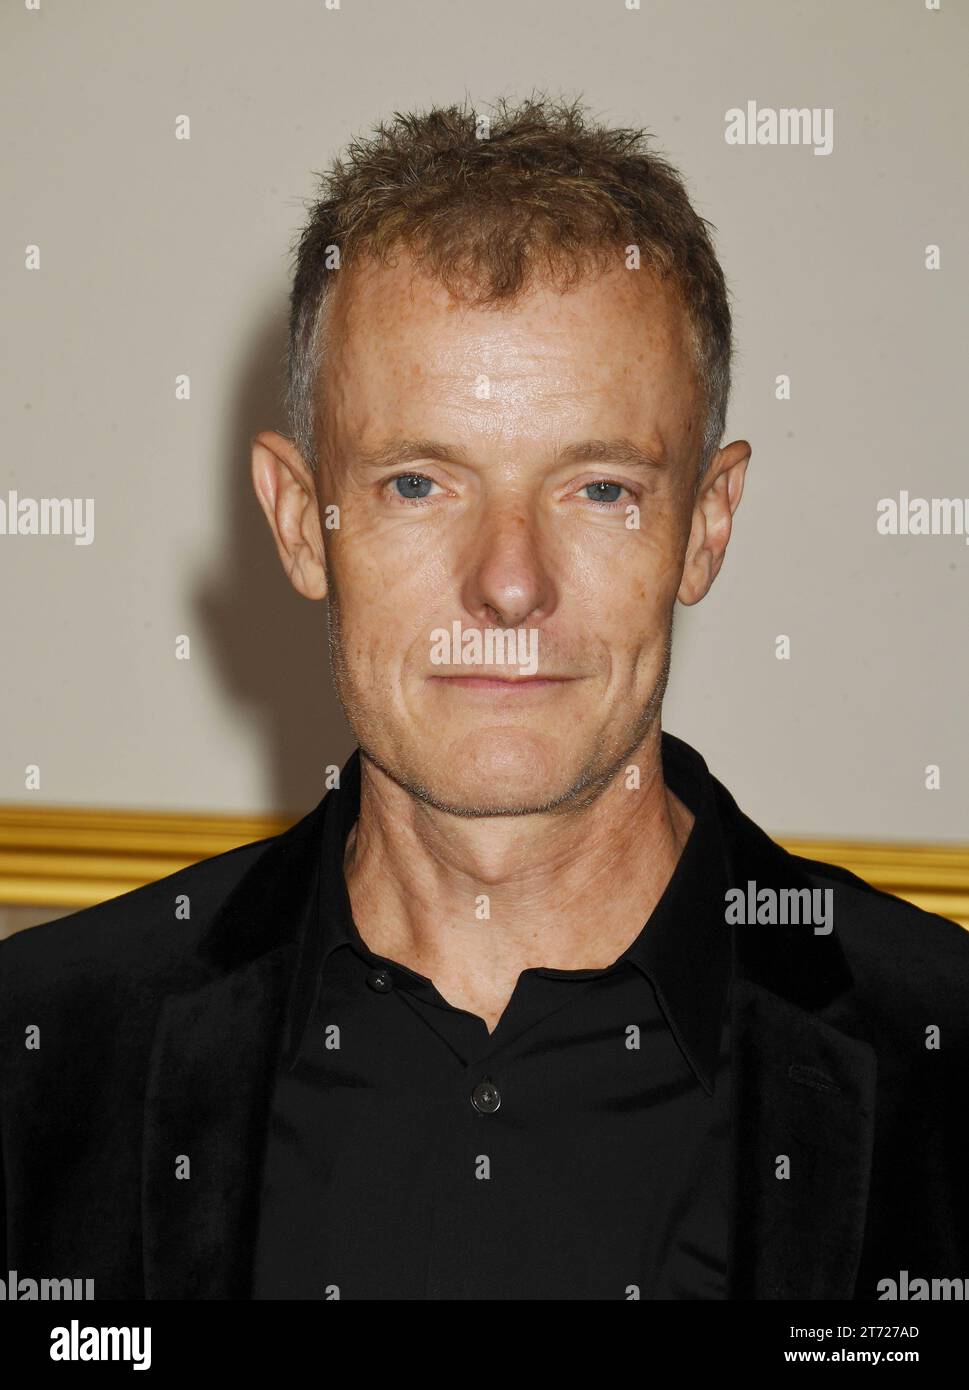 Los Angeles, California, USA. 12th Nov, 2023. Martin Phipps attends the premiere of Netflix's 'The Crown' Season 6 Part 1 at Regency Village Theatre on November 12, 2023 in Los Angeles, California. Credit: Jeffrey Mayer/Jtm Photos/Media Punch/Alamy Live News Stock Photo